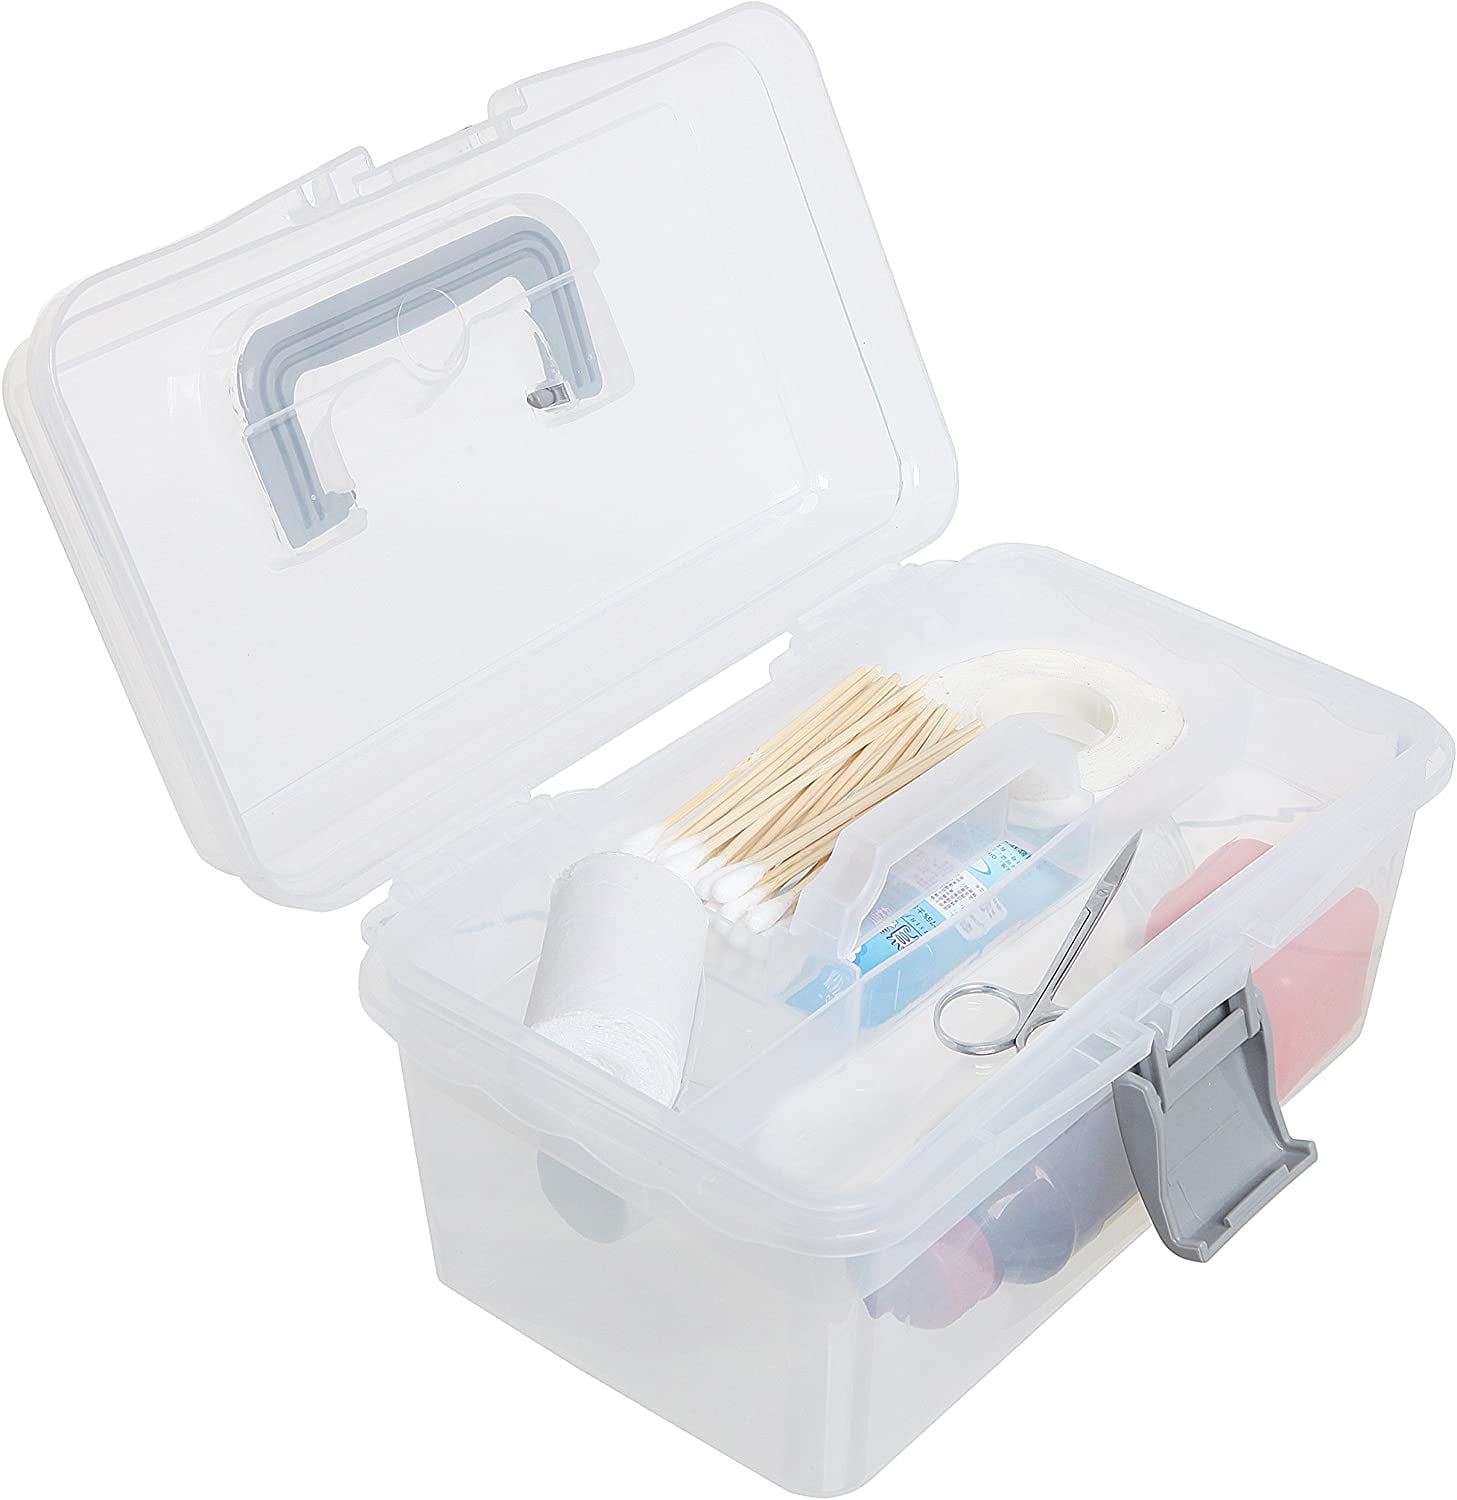 Clear Top First Aid or Arts & Craft Portable Storage with